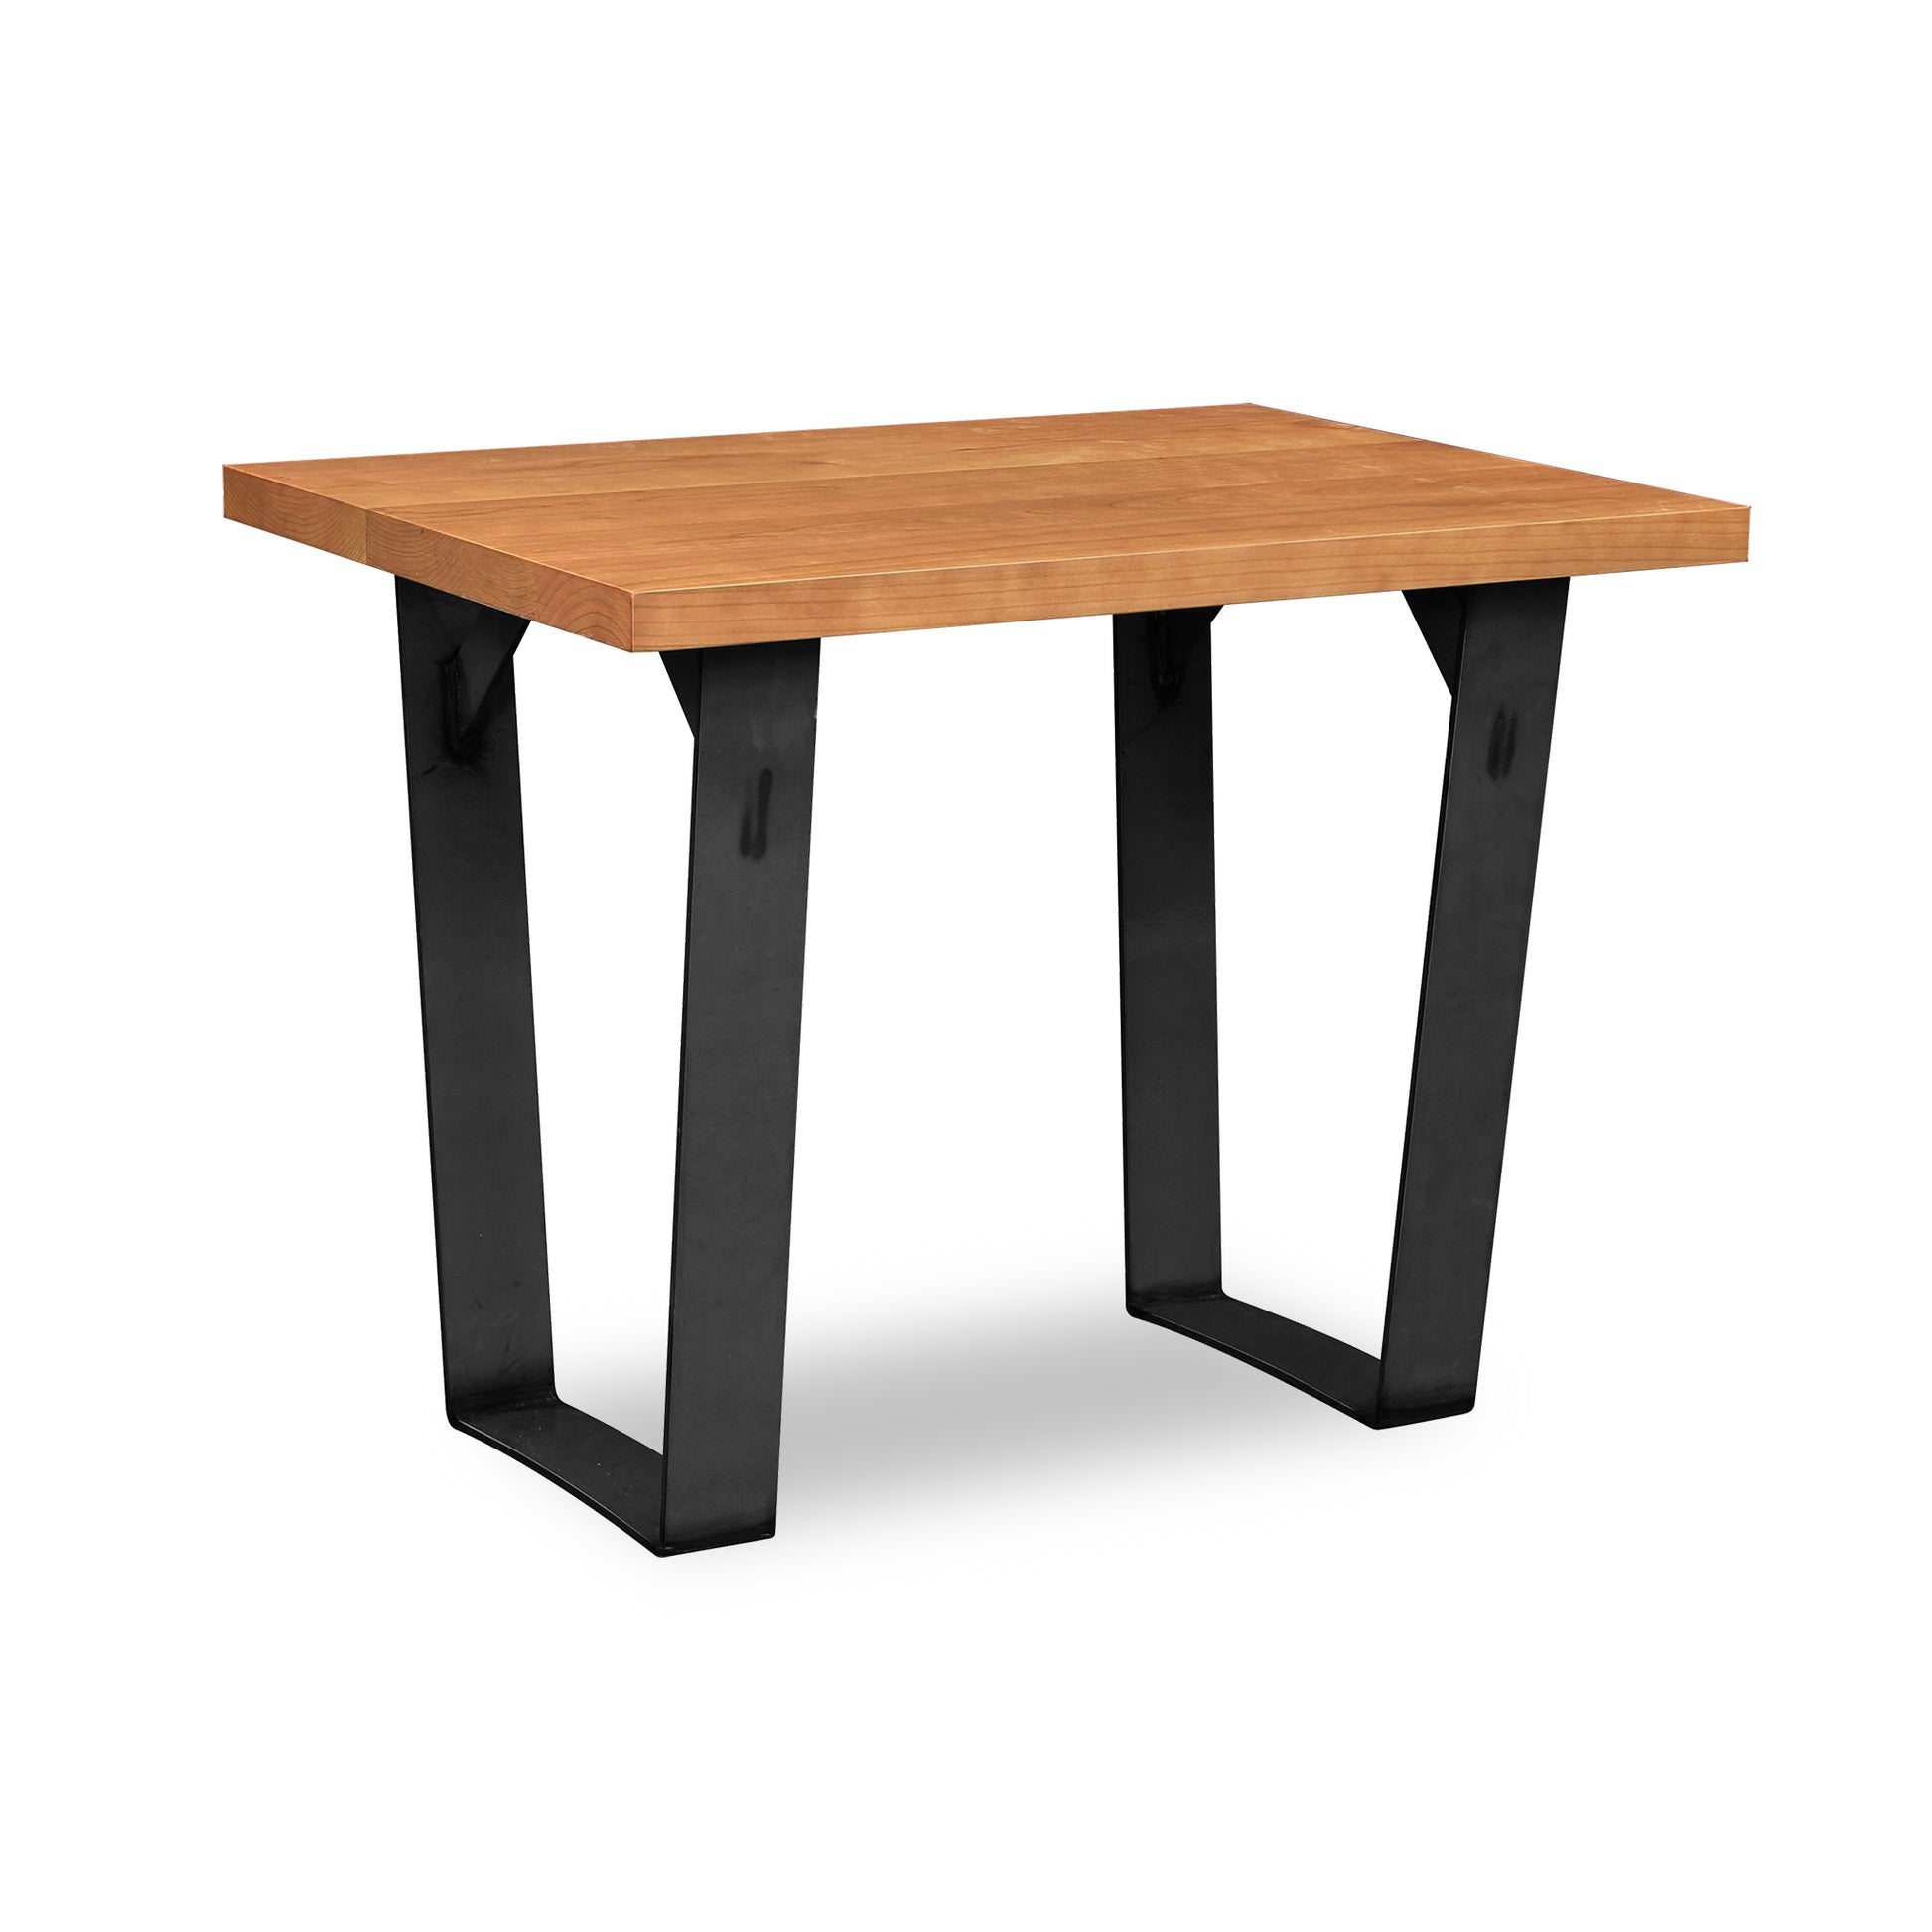 A Metropolitan End Table by Lyndon Furniture with a hardwood plank table top and black legs.